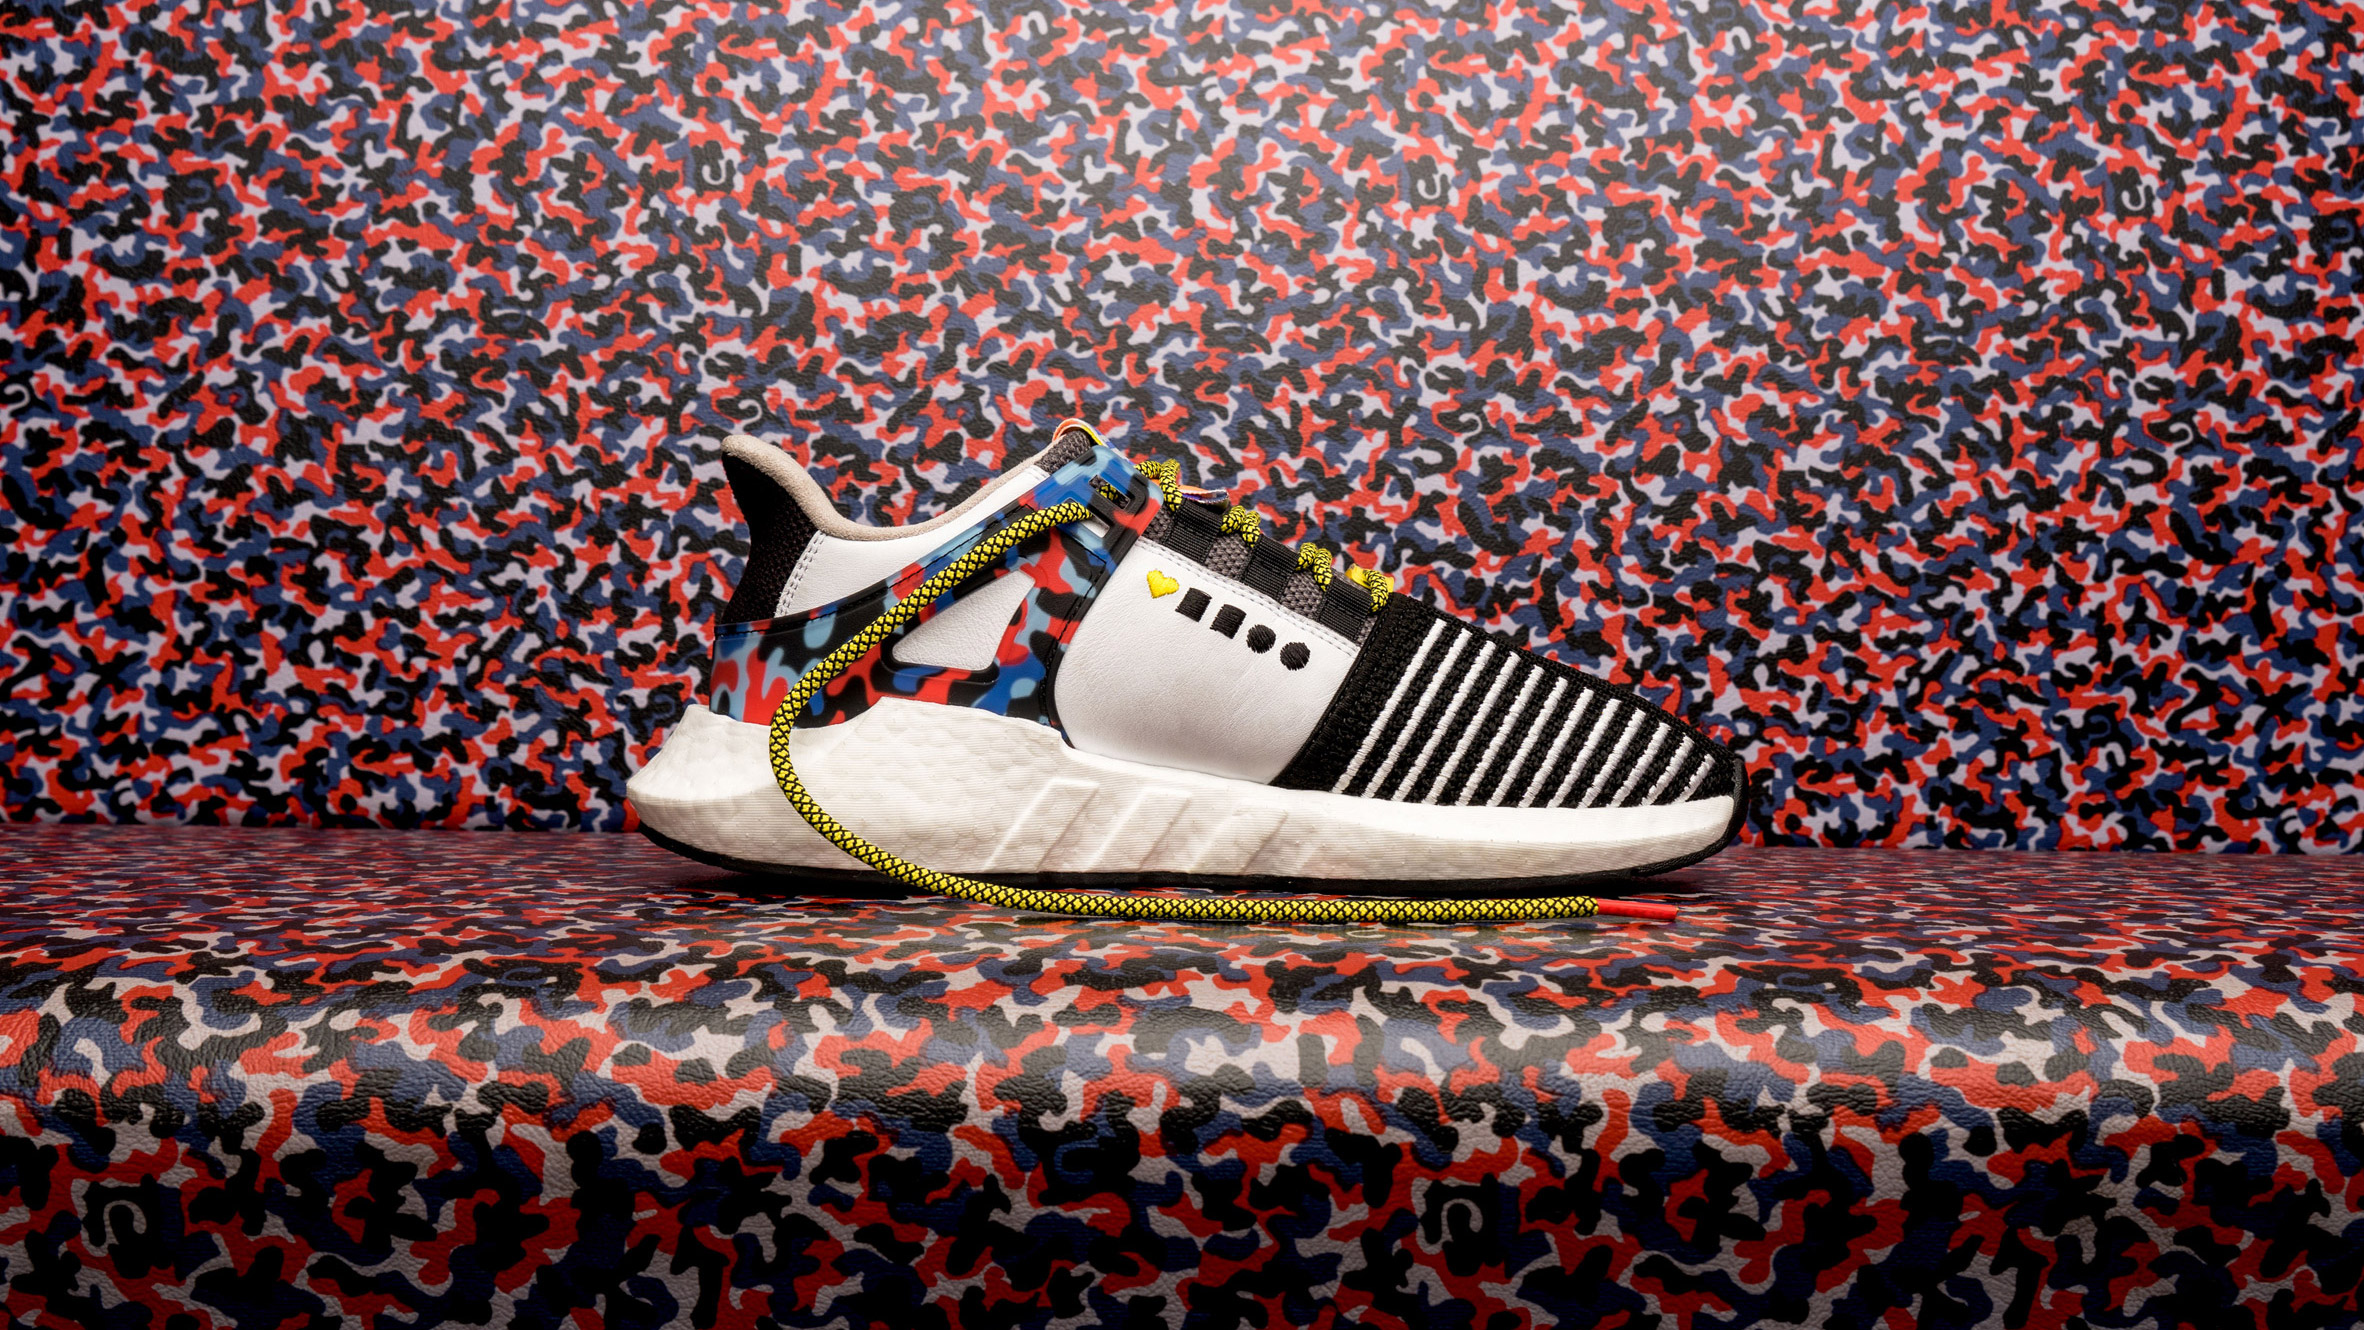 Demontere Bloom Skrøbelig Adidas releases limited-edition trainers that match Berlin subway seats